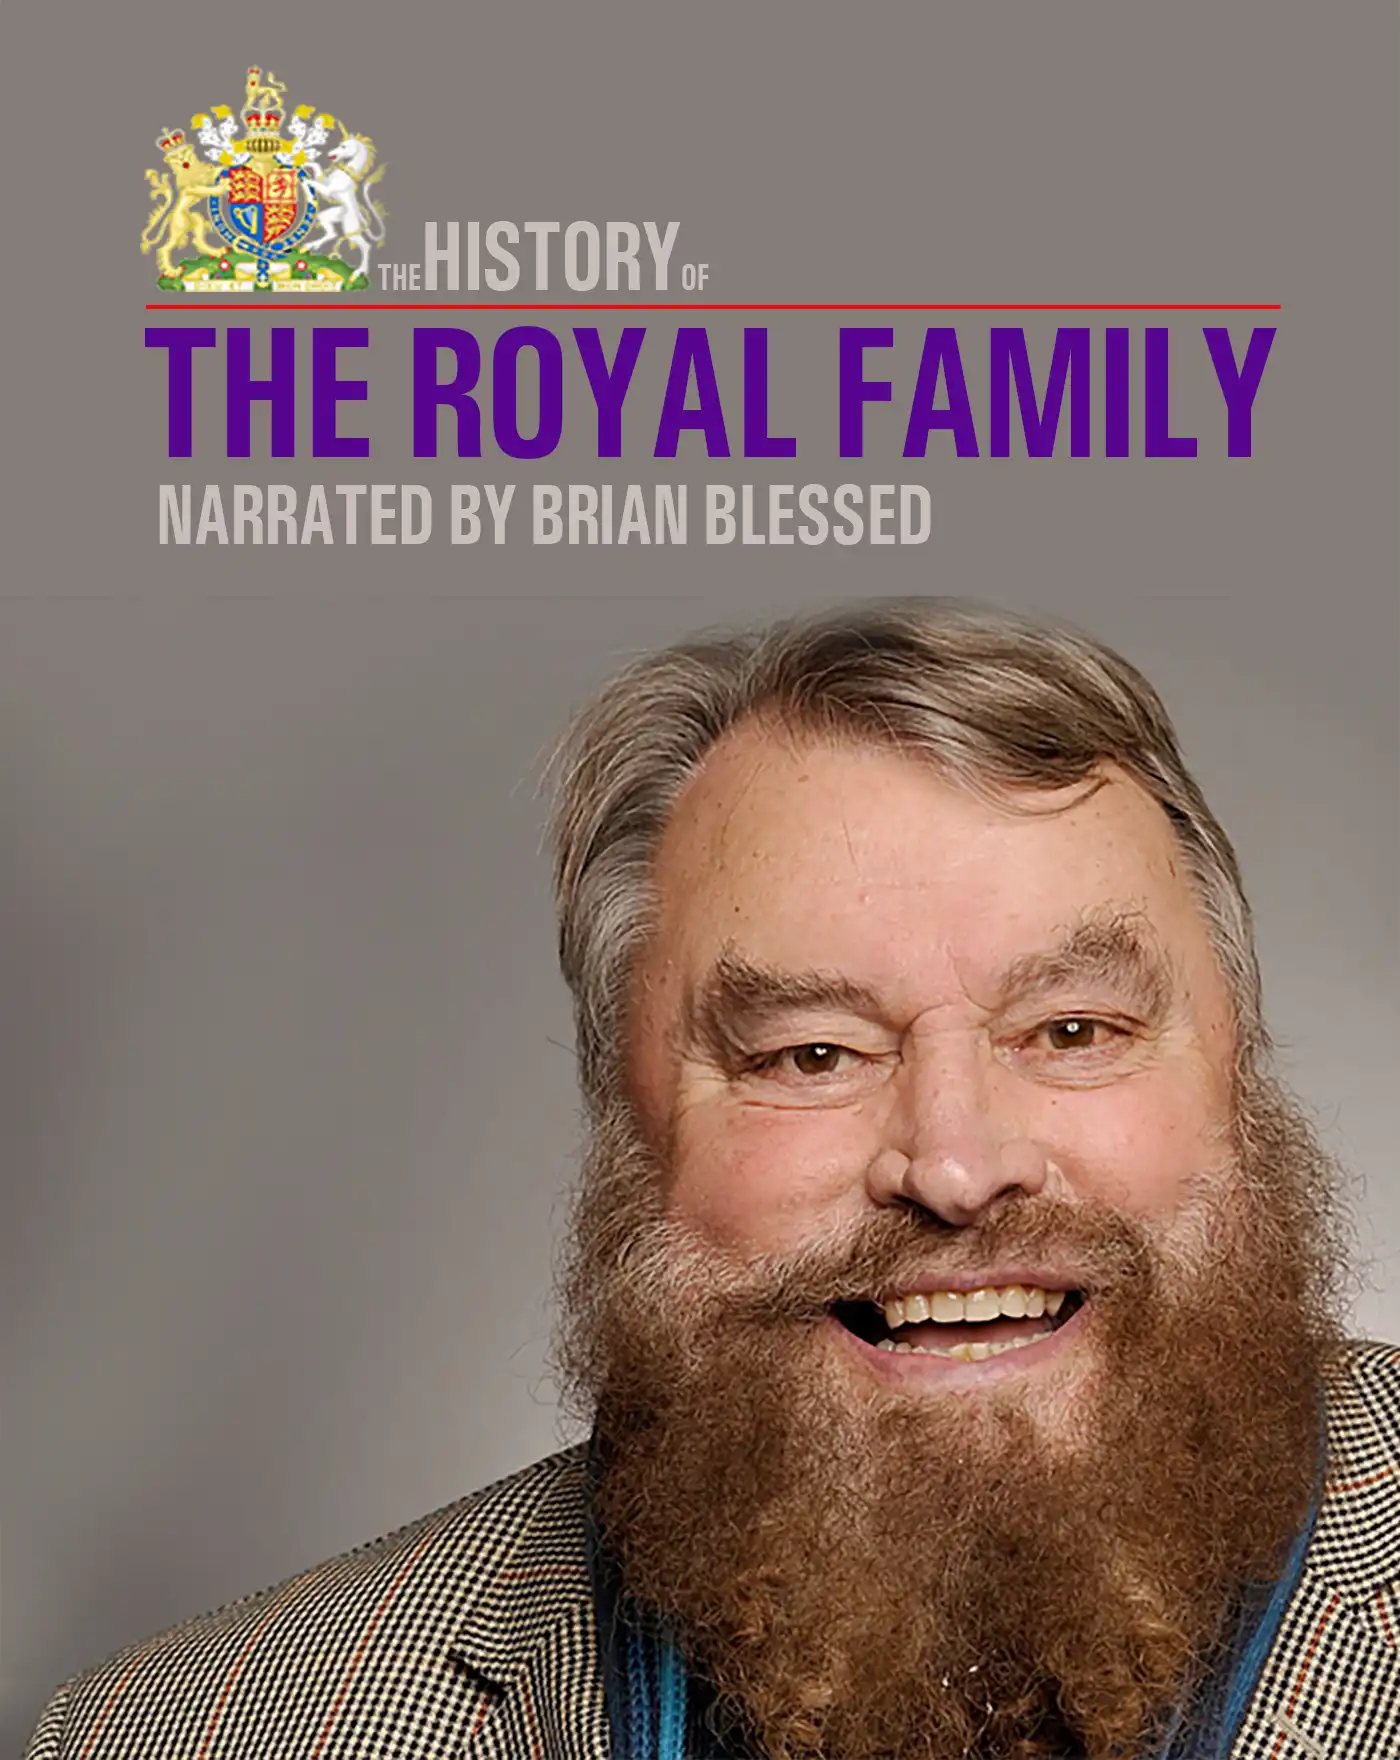 The History of the Royal Family